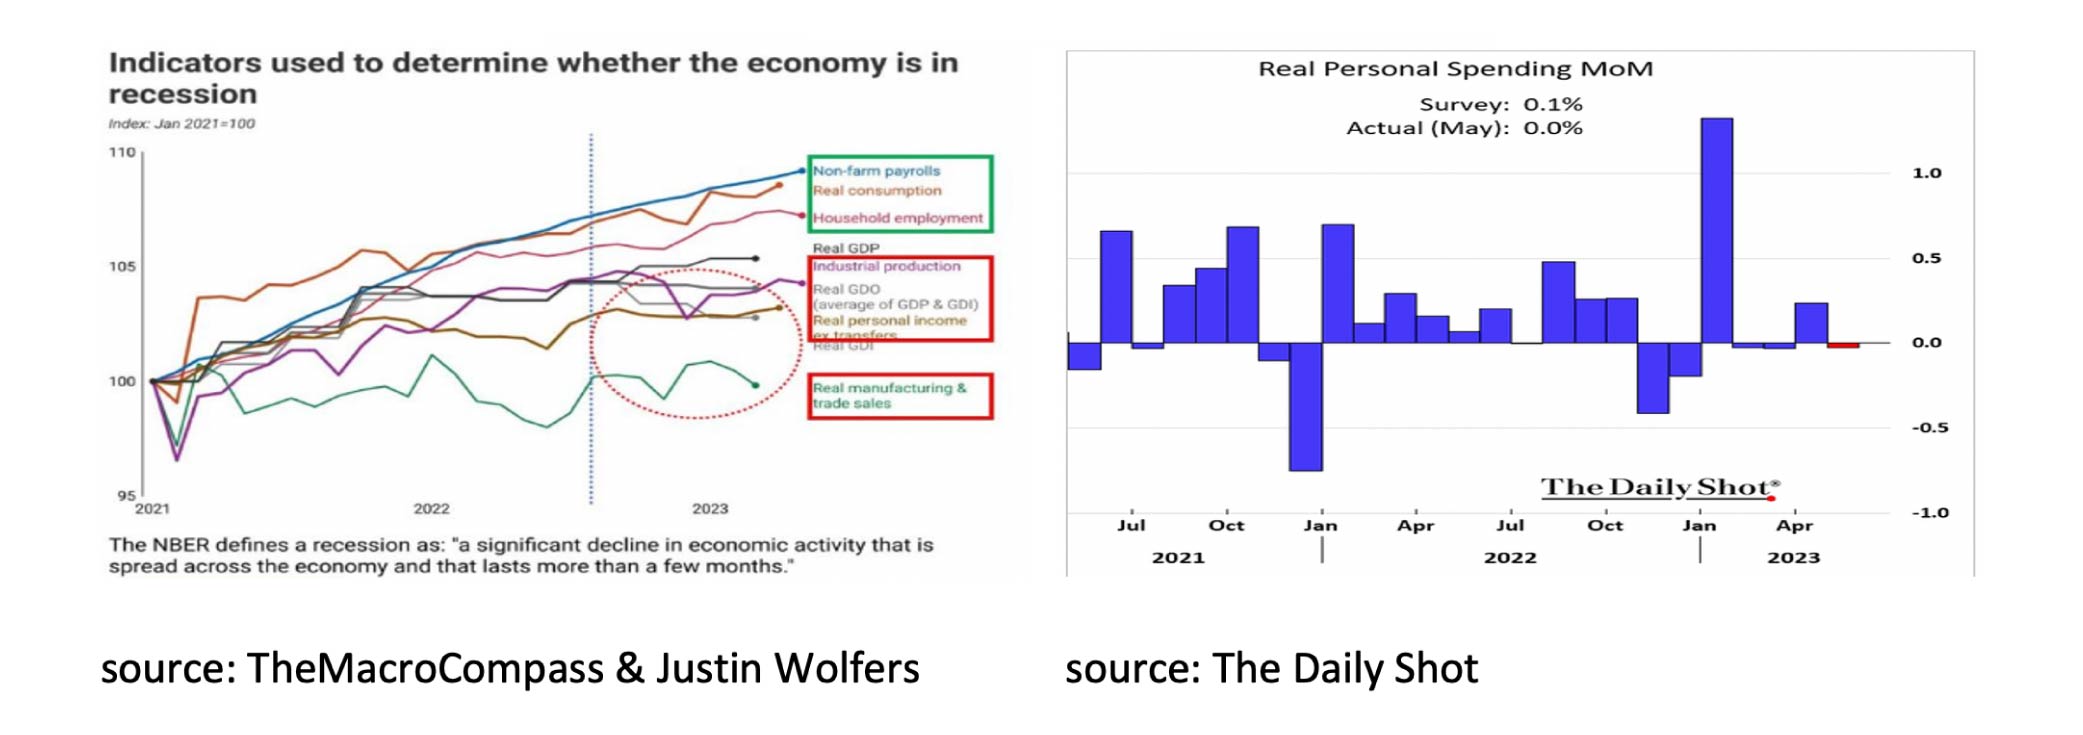 Indicators used to determine whether the economy is in recession